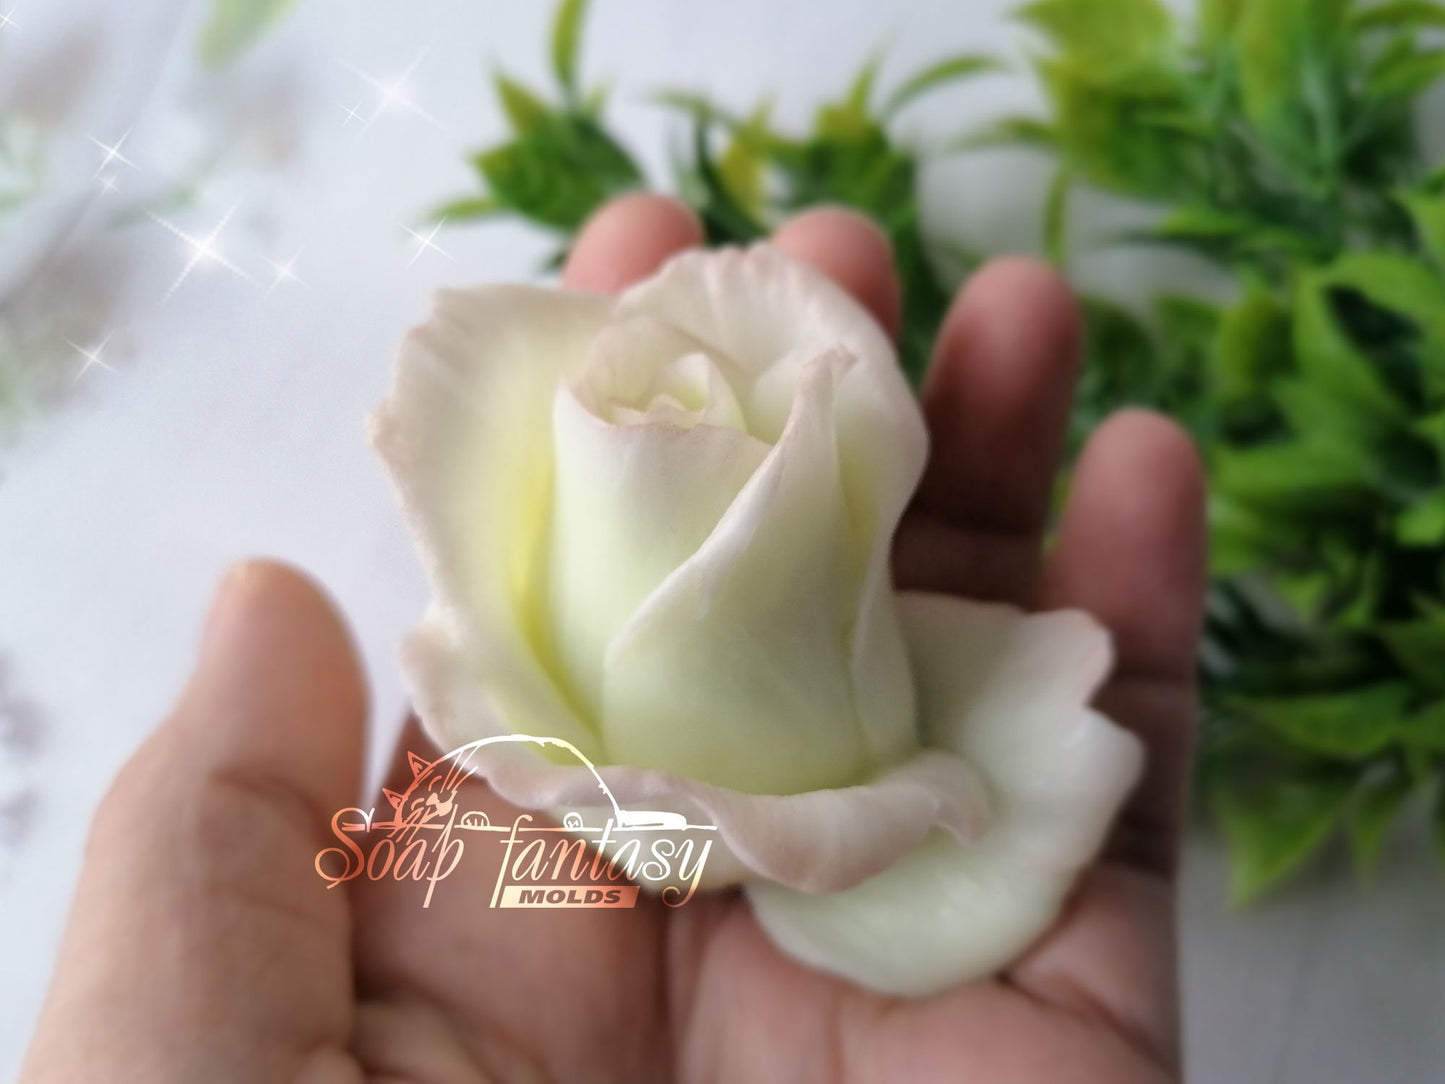 Rose "Glory" silicone soap mold - for soap making (Made of high quality silicone)